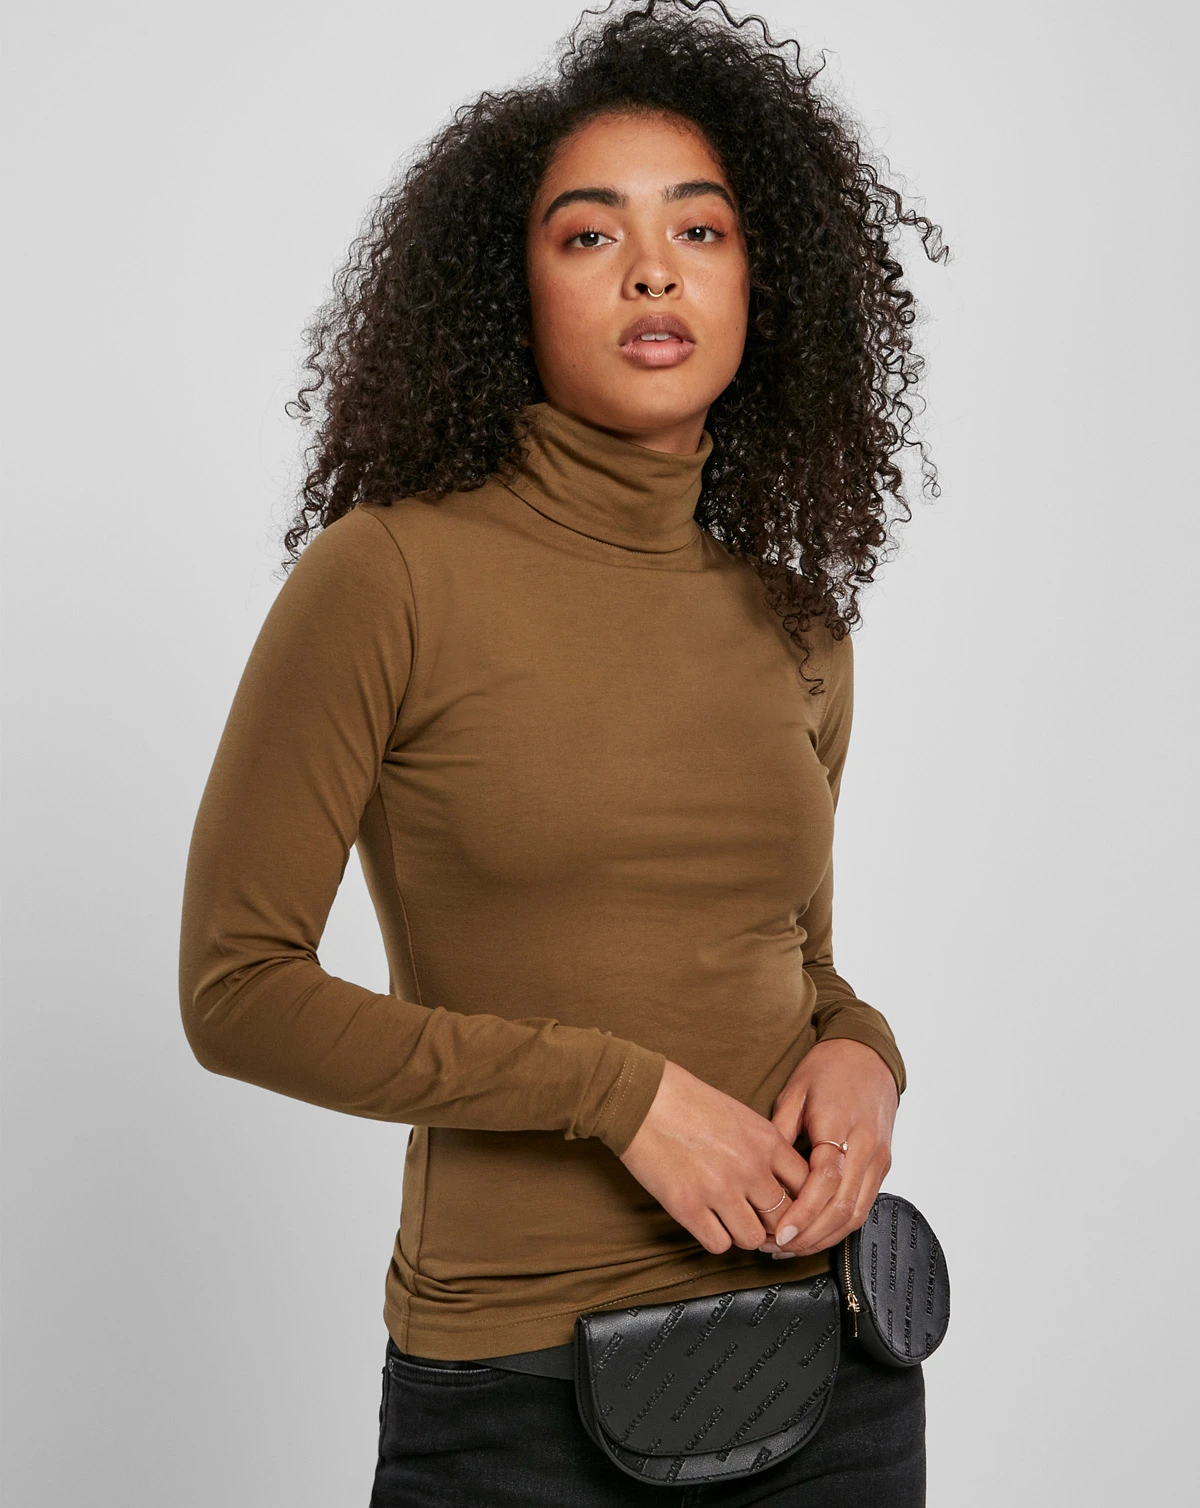 MSBASIC Black Turtle Necks for Womens Long Sleeve Crop Tops for Women  Trendy Basic Kim Possible Costume Shirts(Black,XS) at  Women's  Clothing store